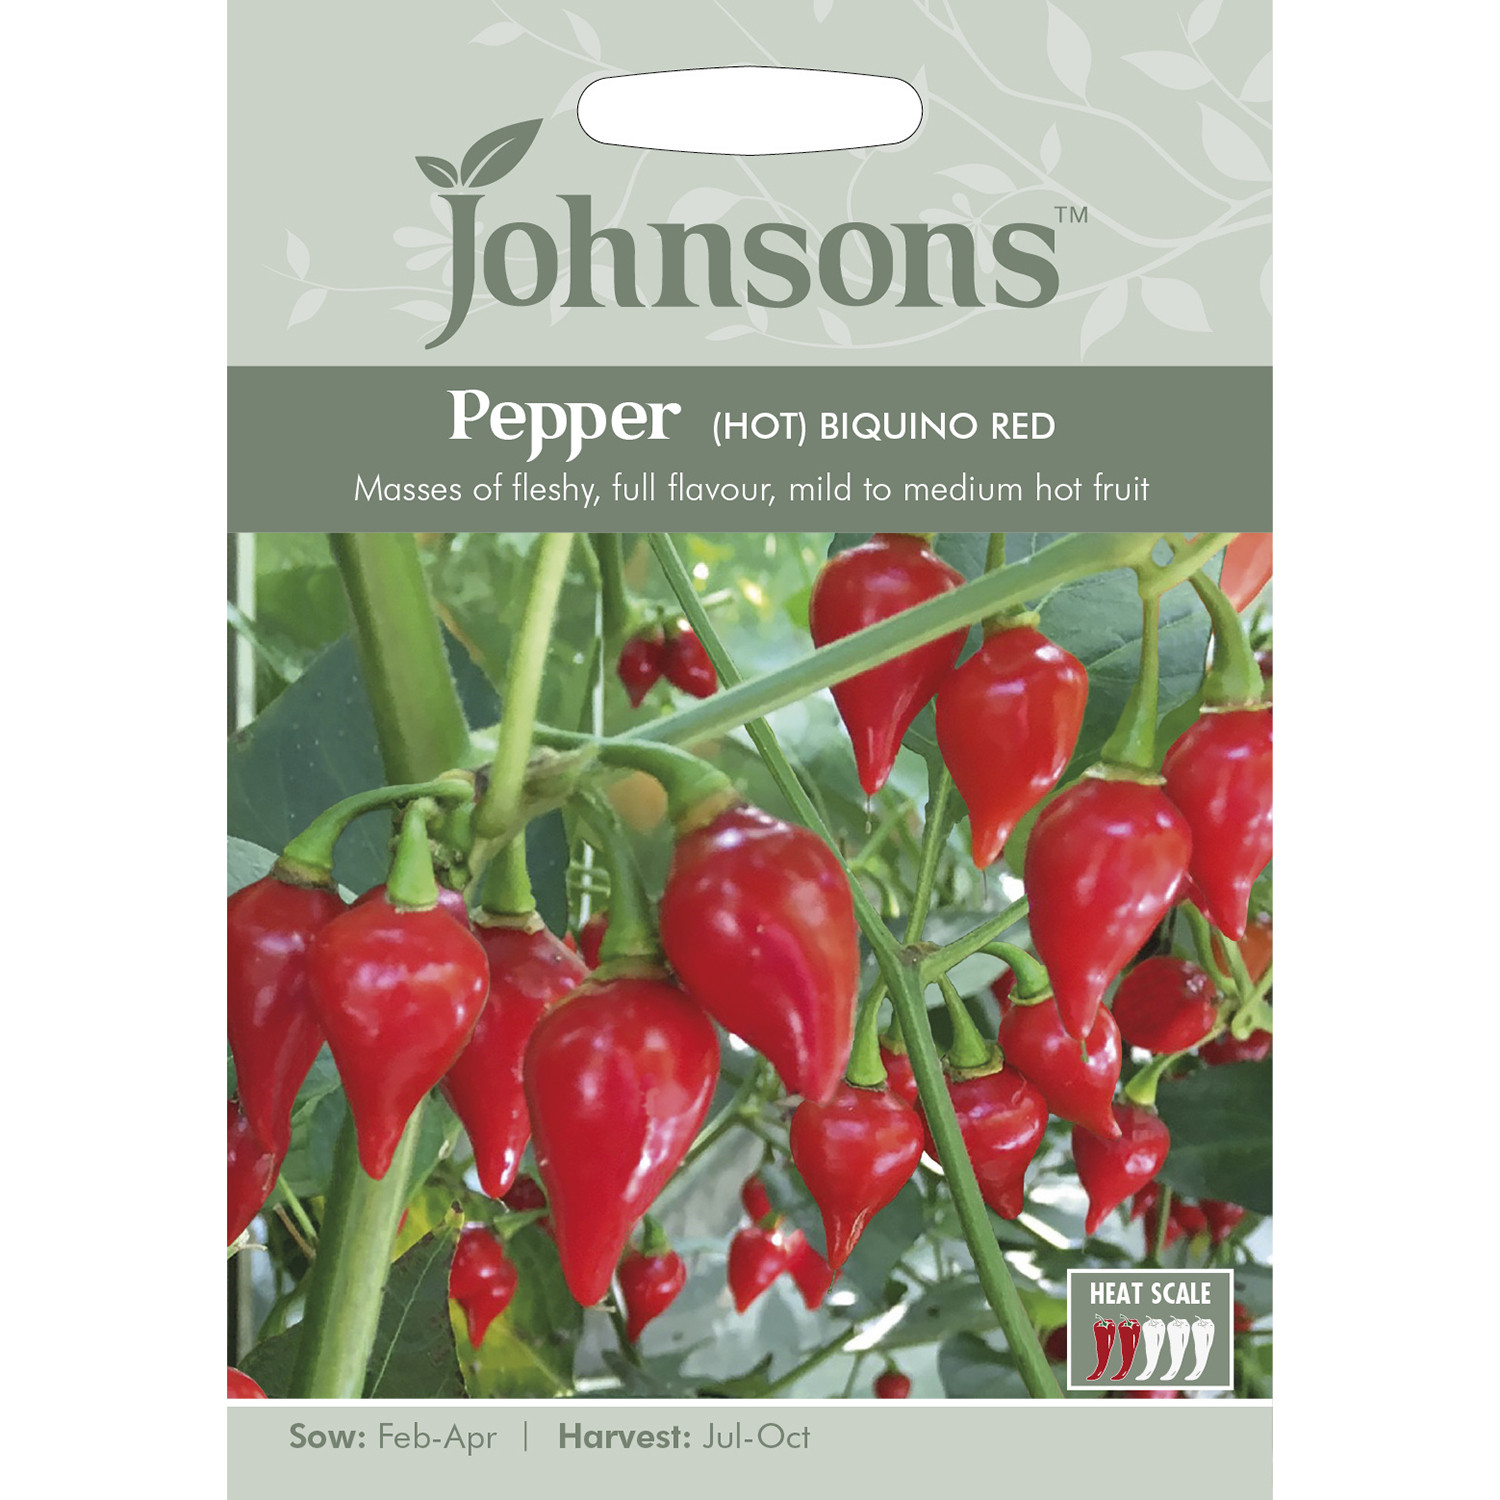 Johnsons Biquino Red Hot Peppers Image 2